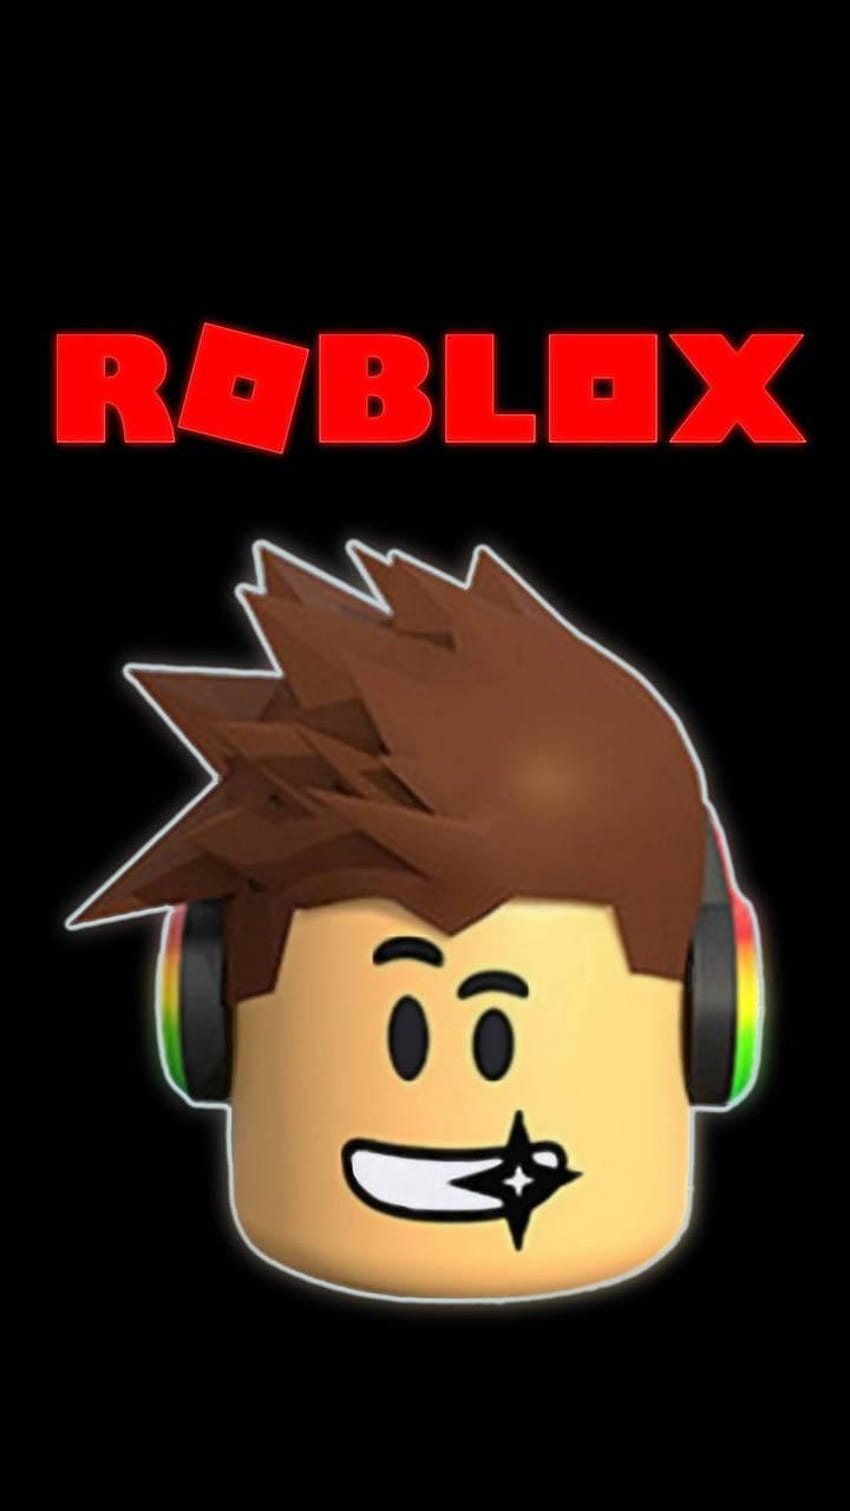 Roblox iPhone - Awesome HD phone wallpaper | Pxfuel